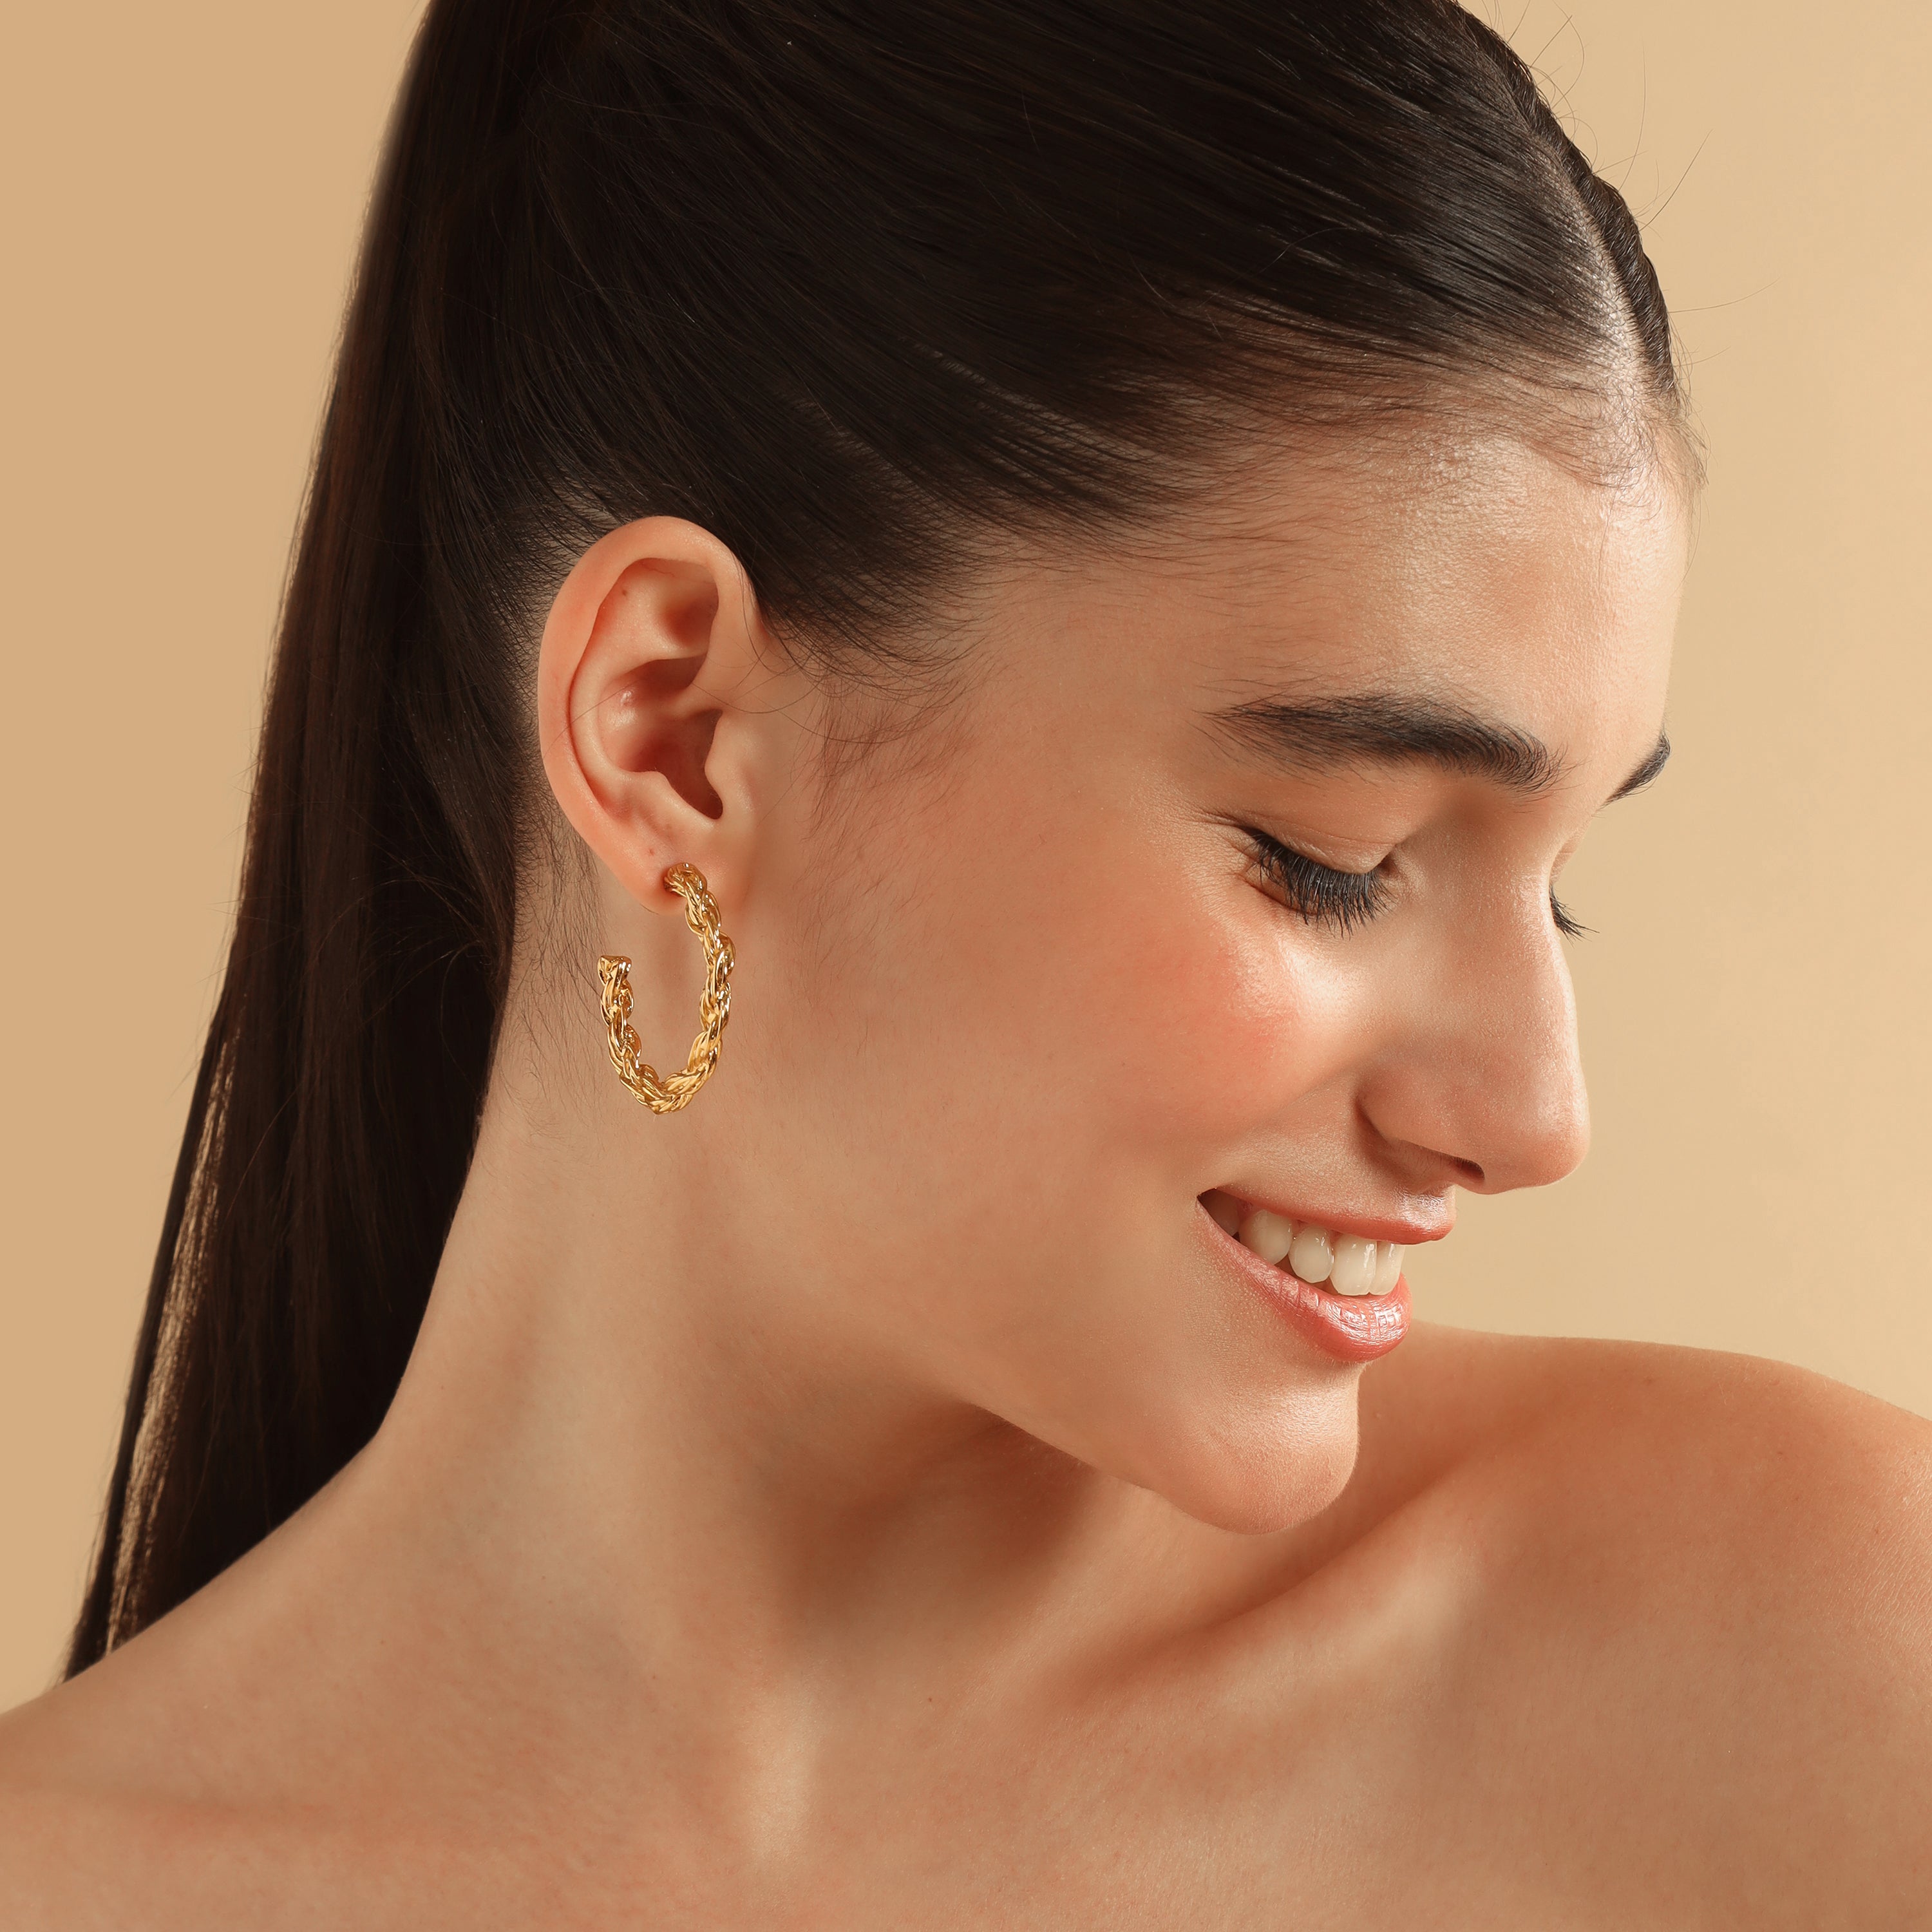 TFC Braided Italian Charm Luxury Hoop Earrings- Discover daily wear gold earrings including stud earrings, hoop earrings, and pearl earrings, perfect as earrings for women and earrings for girls.Find the cheapest fashion jewellery which is anti-tarnis​h only at The Fun company